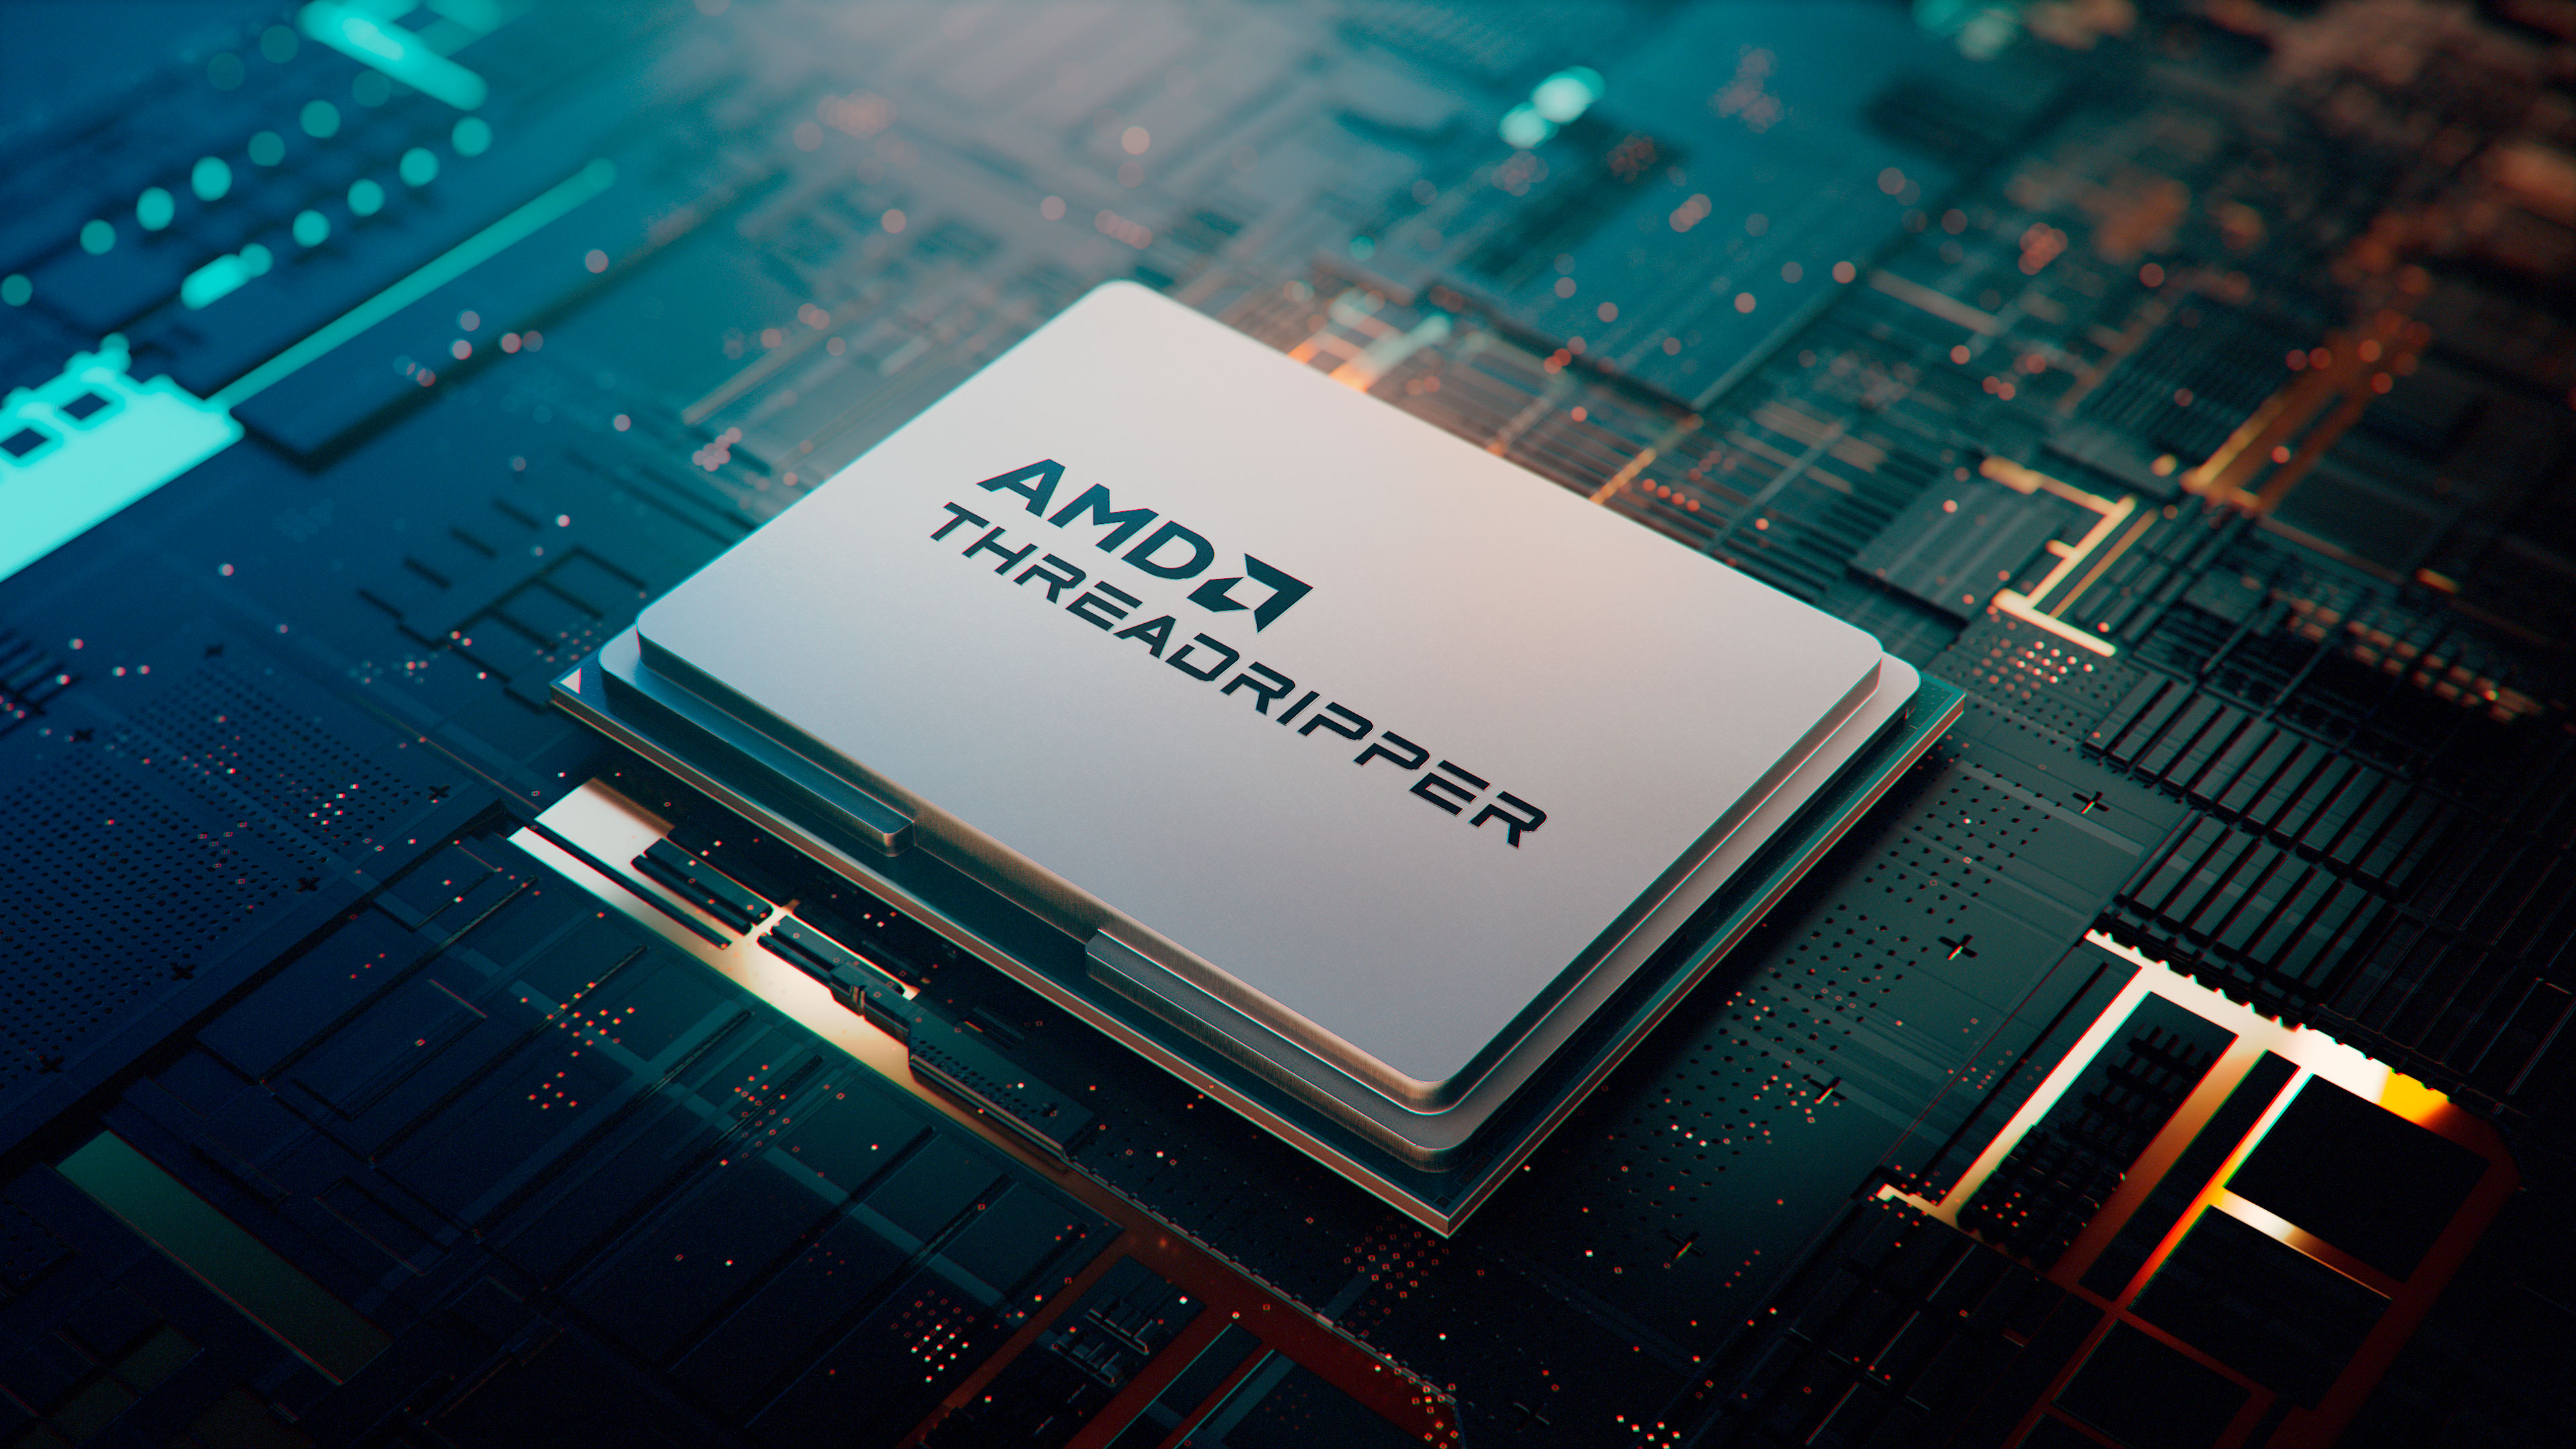 AMD Unleashes a Beast with 96 Core Threadripper Processor - EE Times